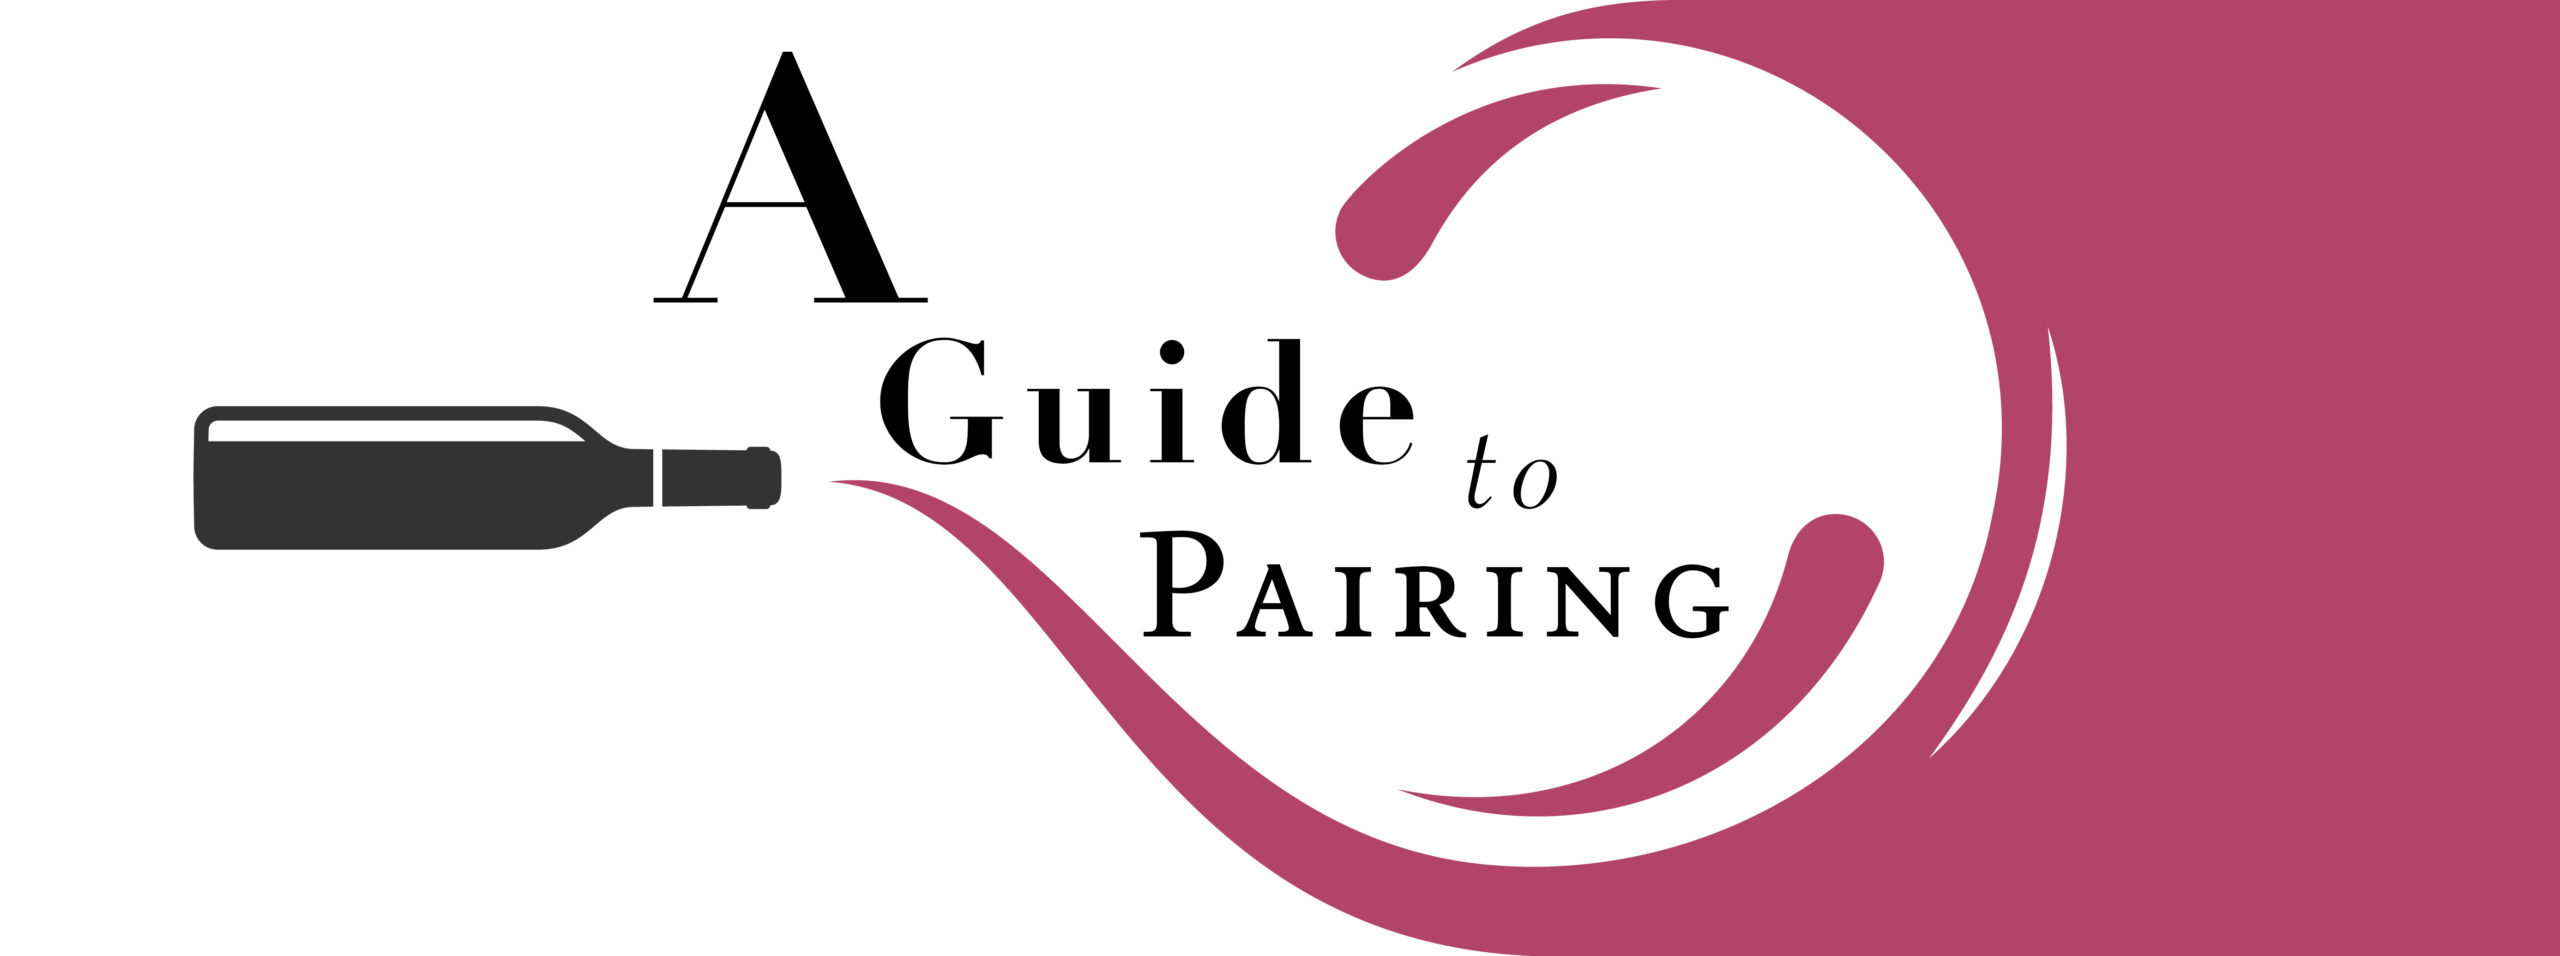 A Guide to Pairing graphic in red with a wine bottle